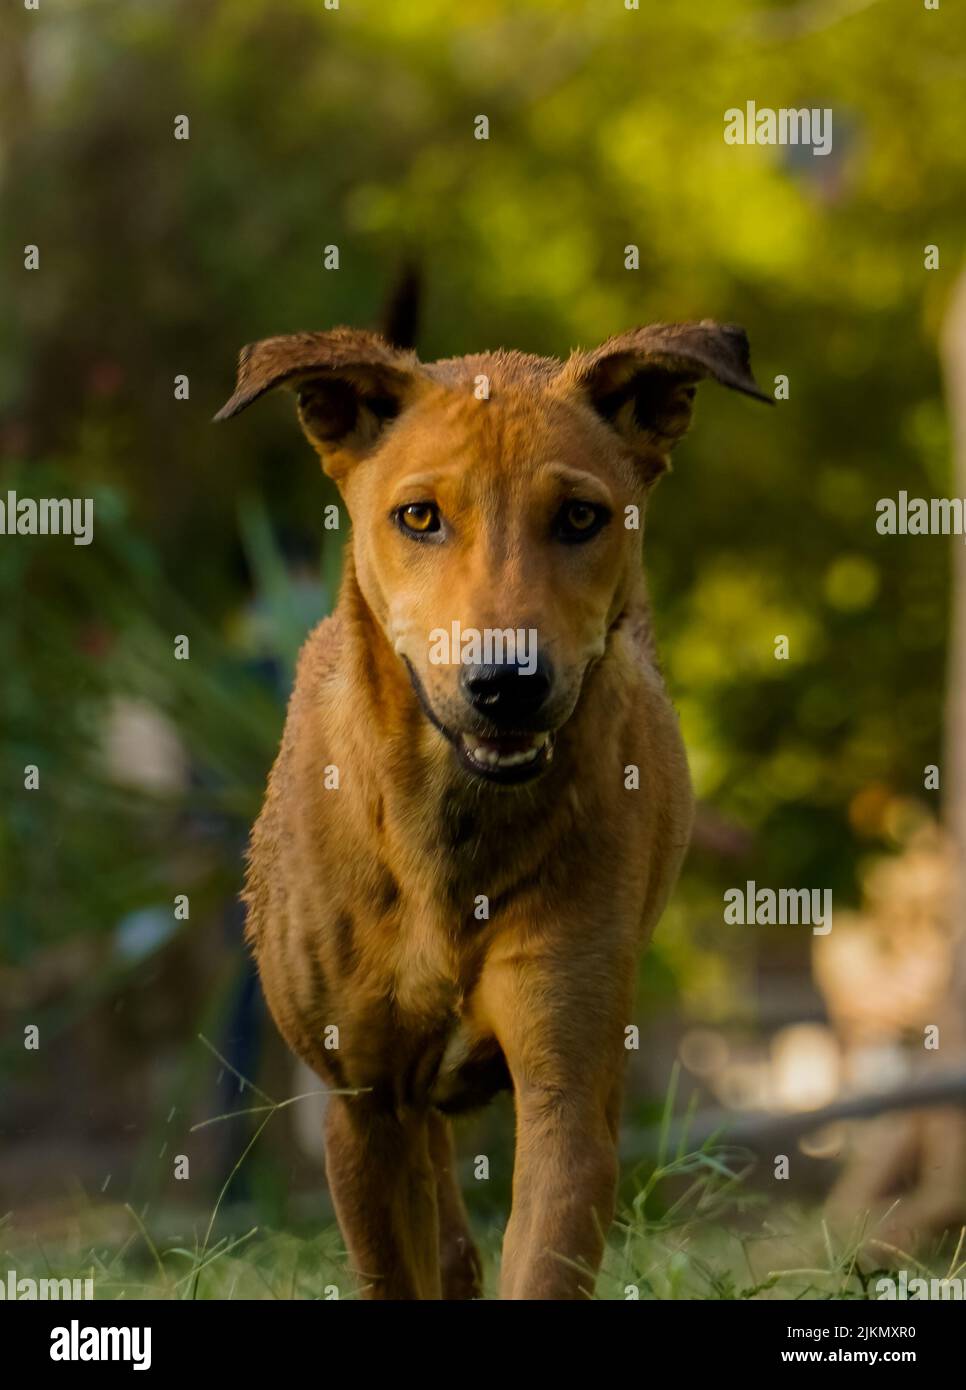 A vertical shot of a cute brown dog in a park Stock Photo